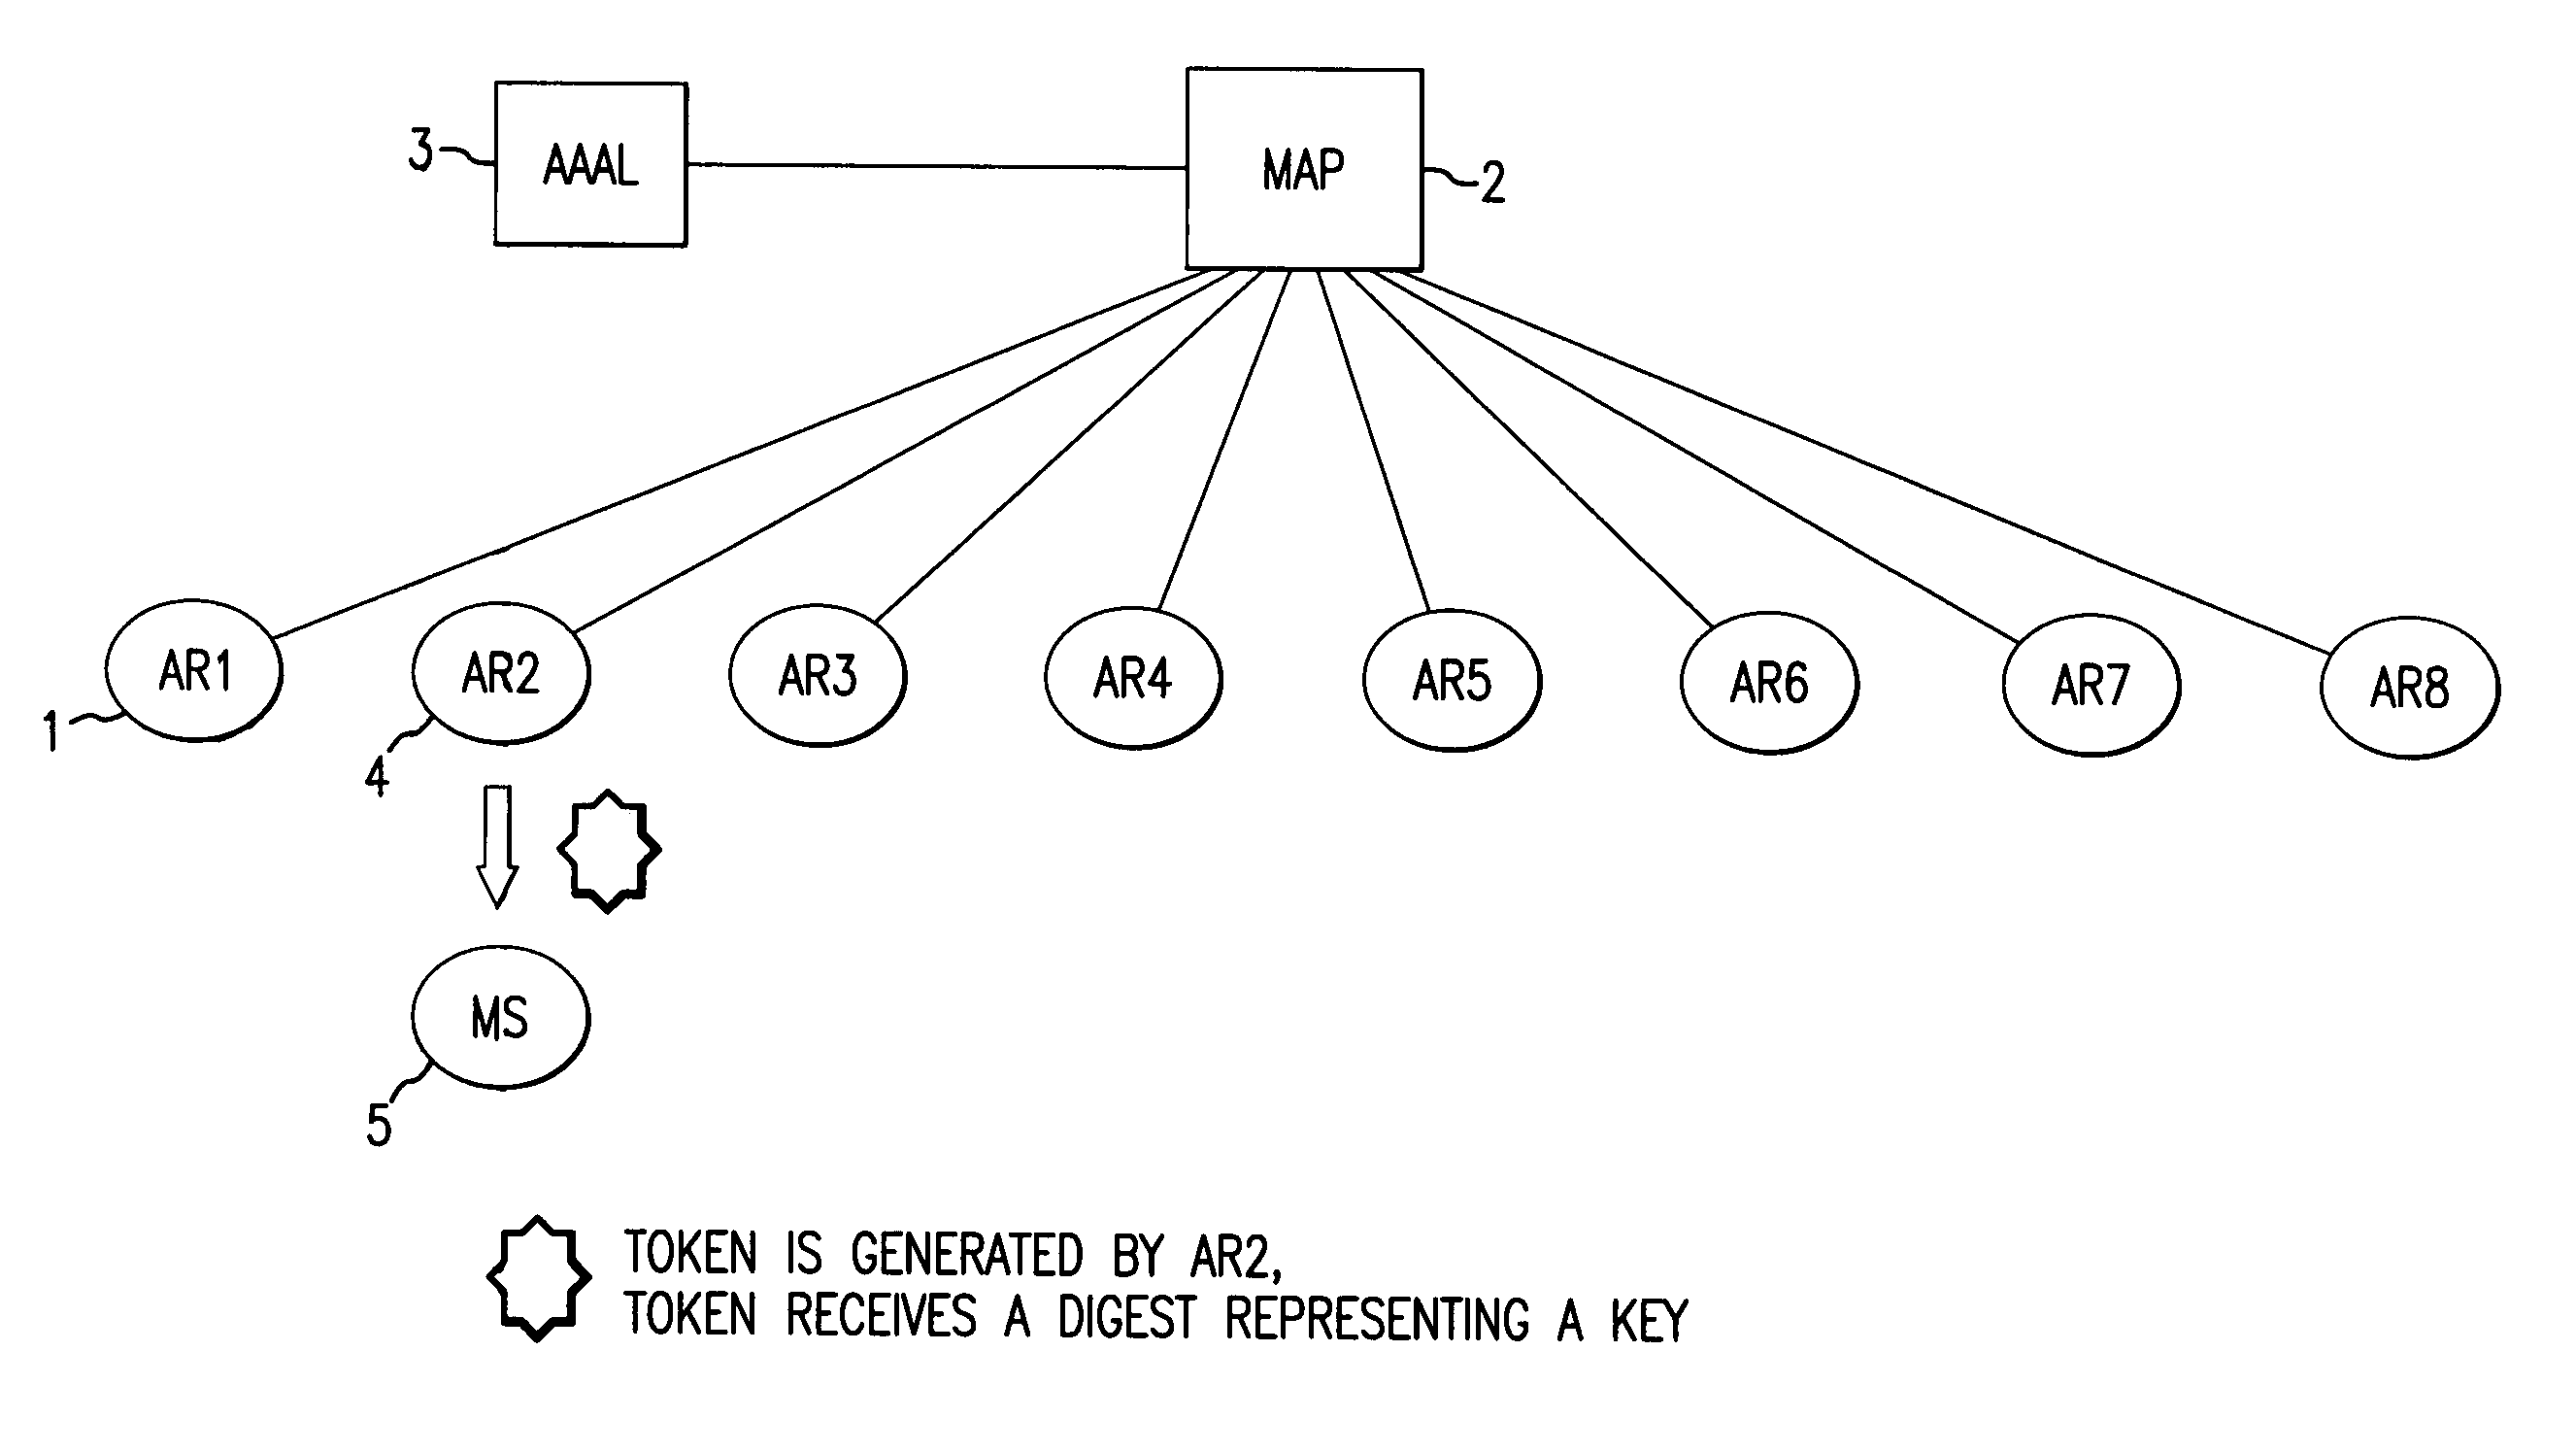 Verifying check-in authentication by using an access authentication token